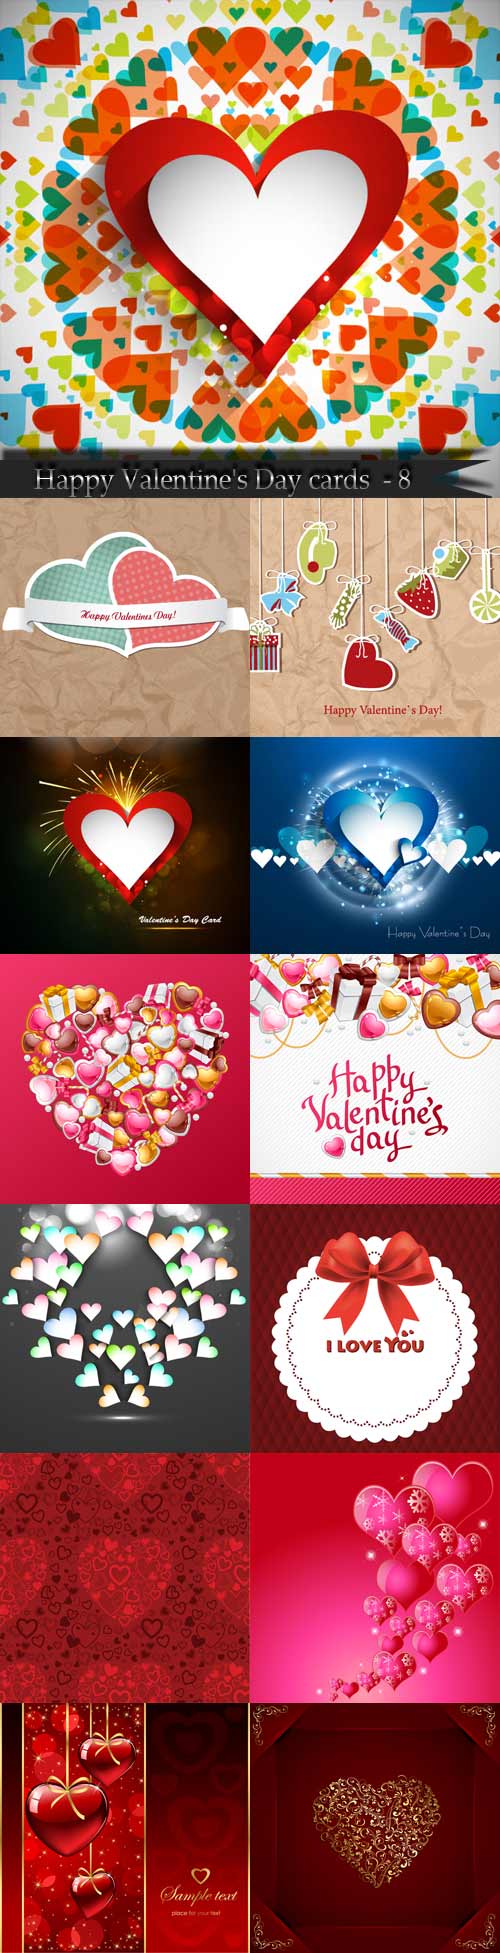 Happy Valentine's Day cards and backgrounds - 8